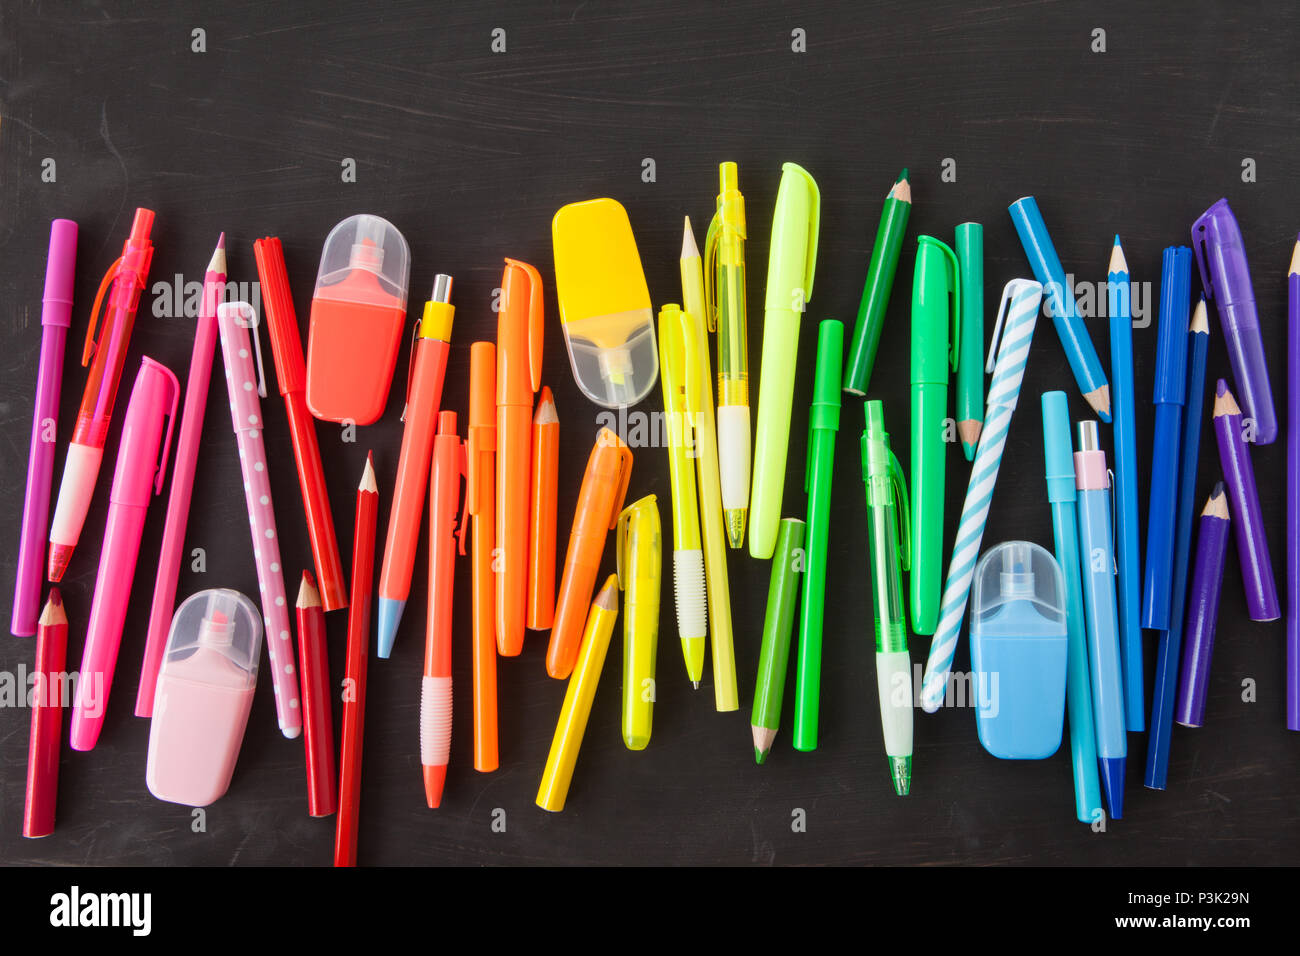 Variety of colorful pens in a rainbow on black background Stock Photo